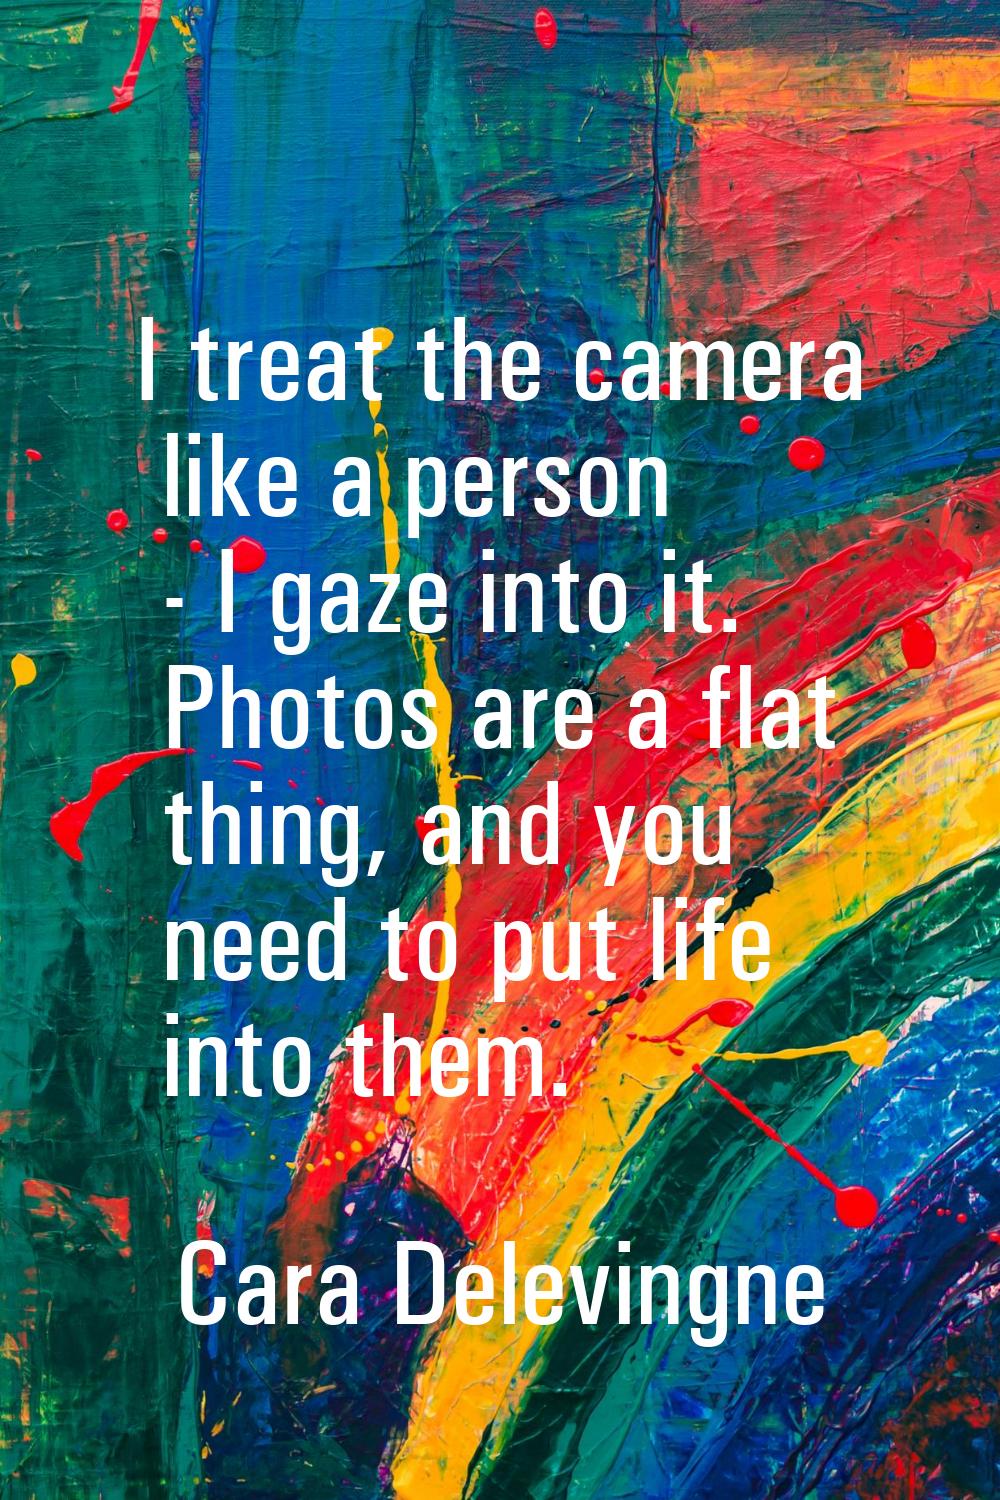 I treat the camera like a person - I gaze into it. Photos are a flat thing, and you need to put lif